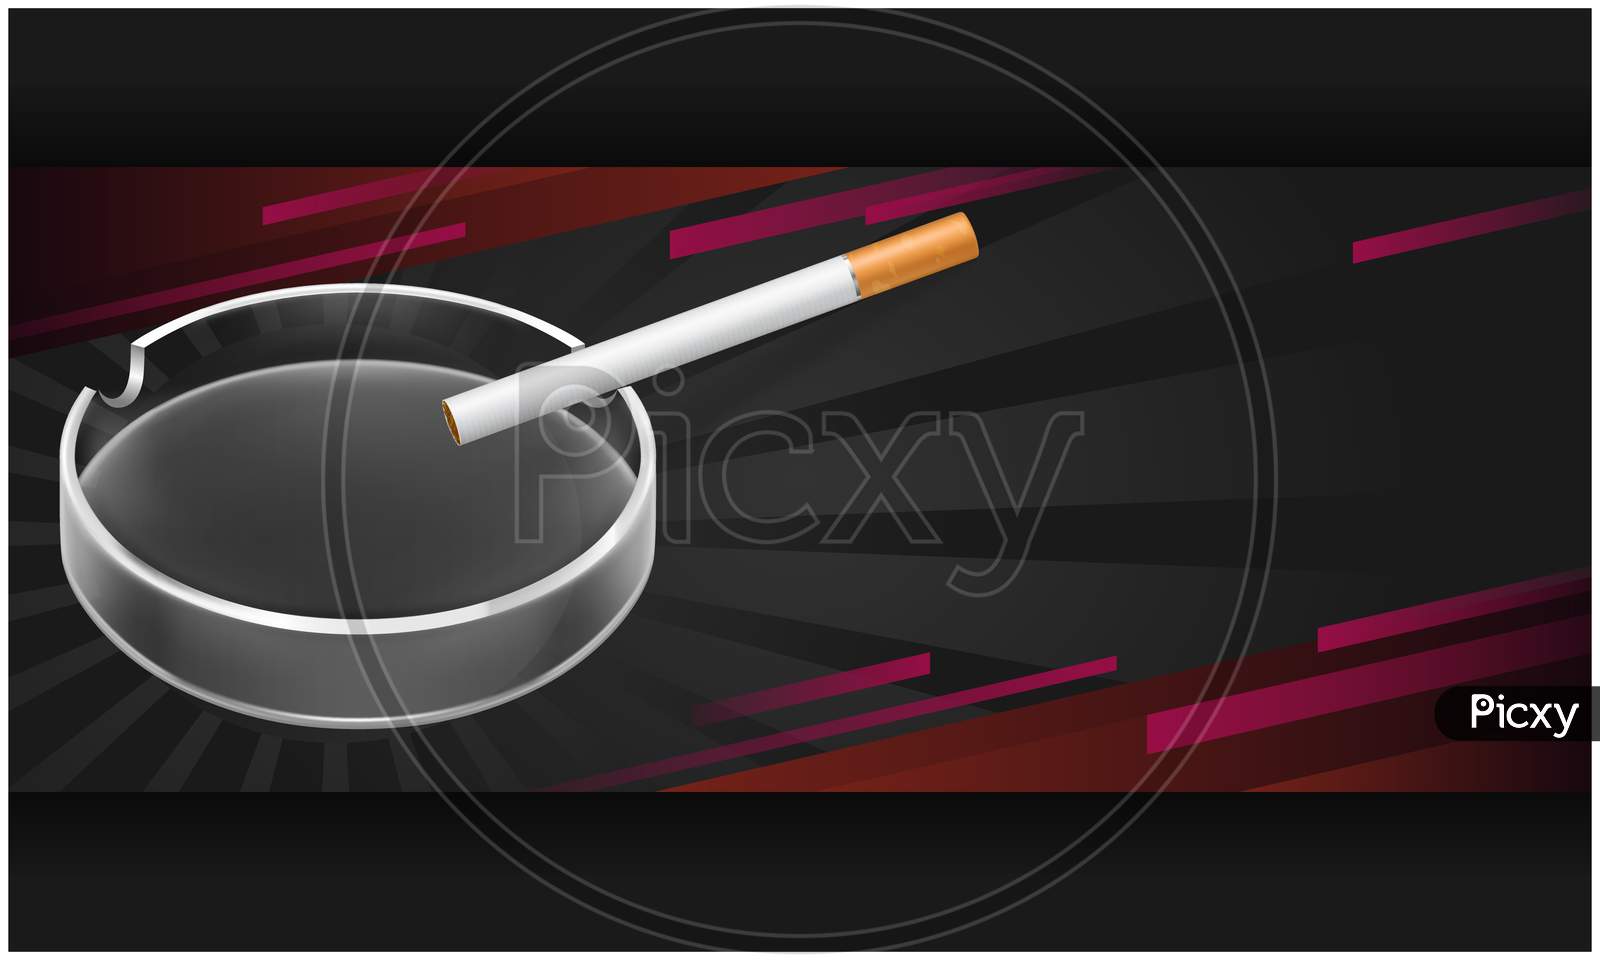 Mock Up Illustration Of Cigarette And Ashtray On Abstract Background